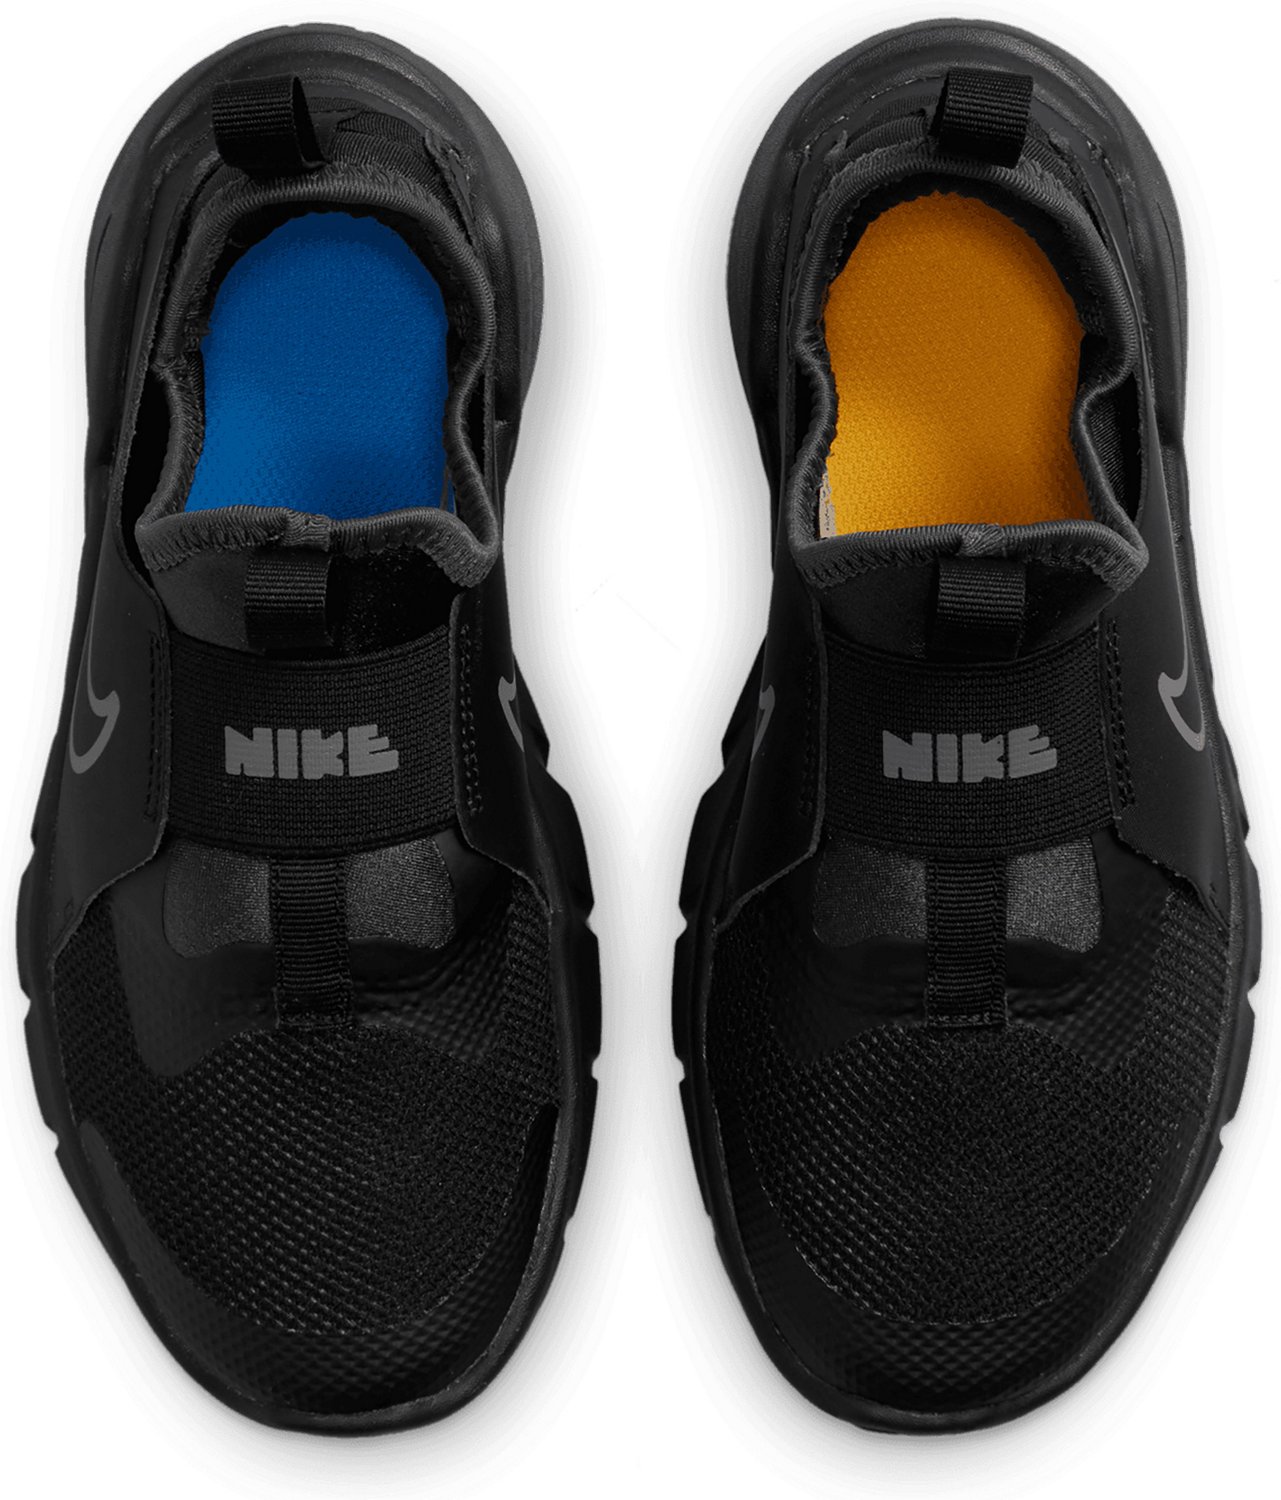 Nike Kids' Flex Runner 2 PS | Free Shipping at Academy